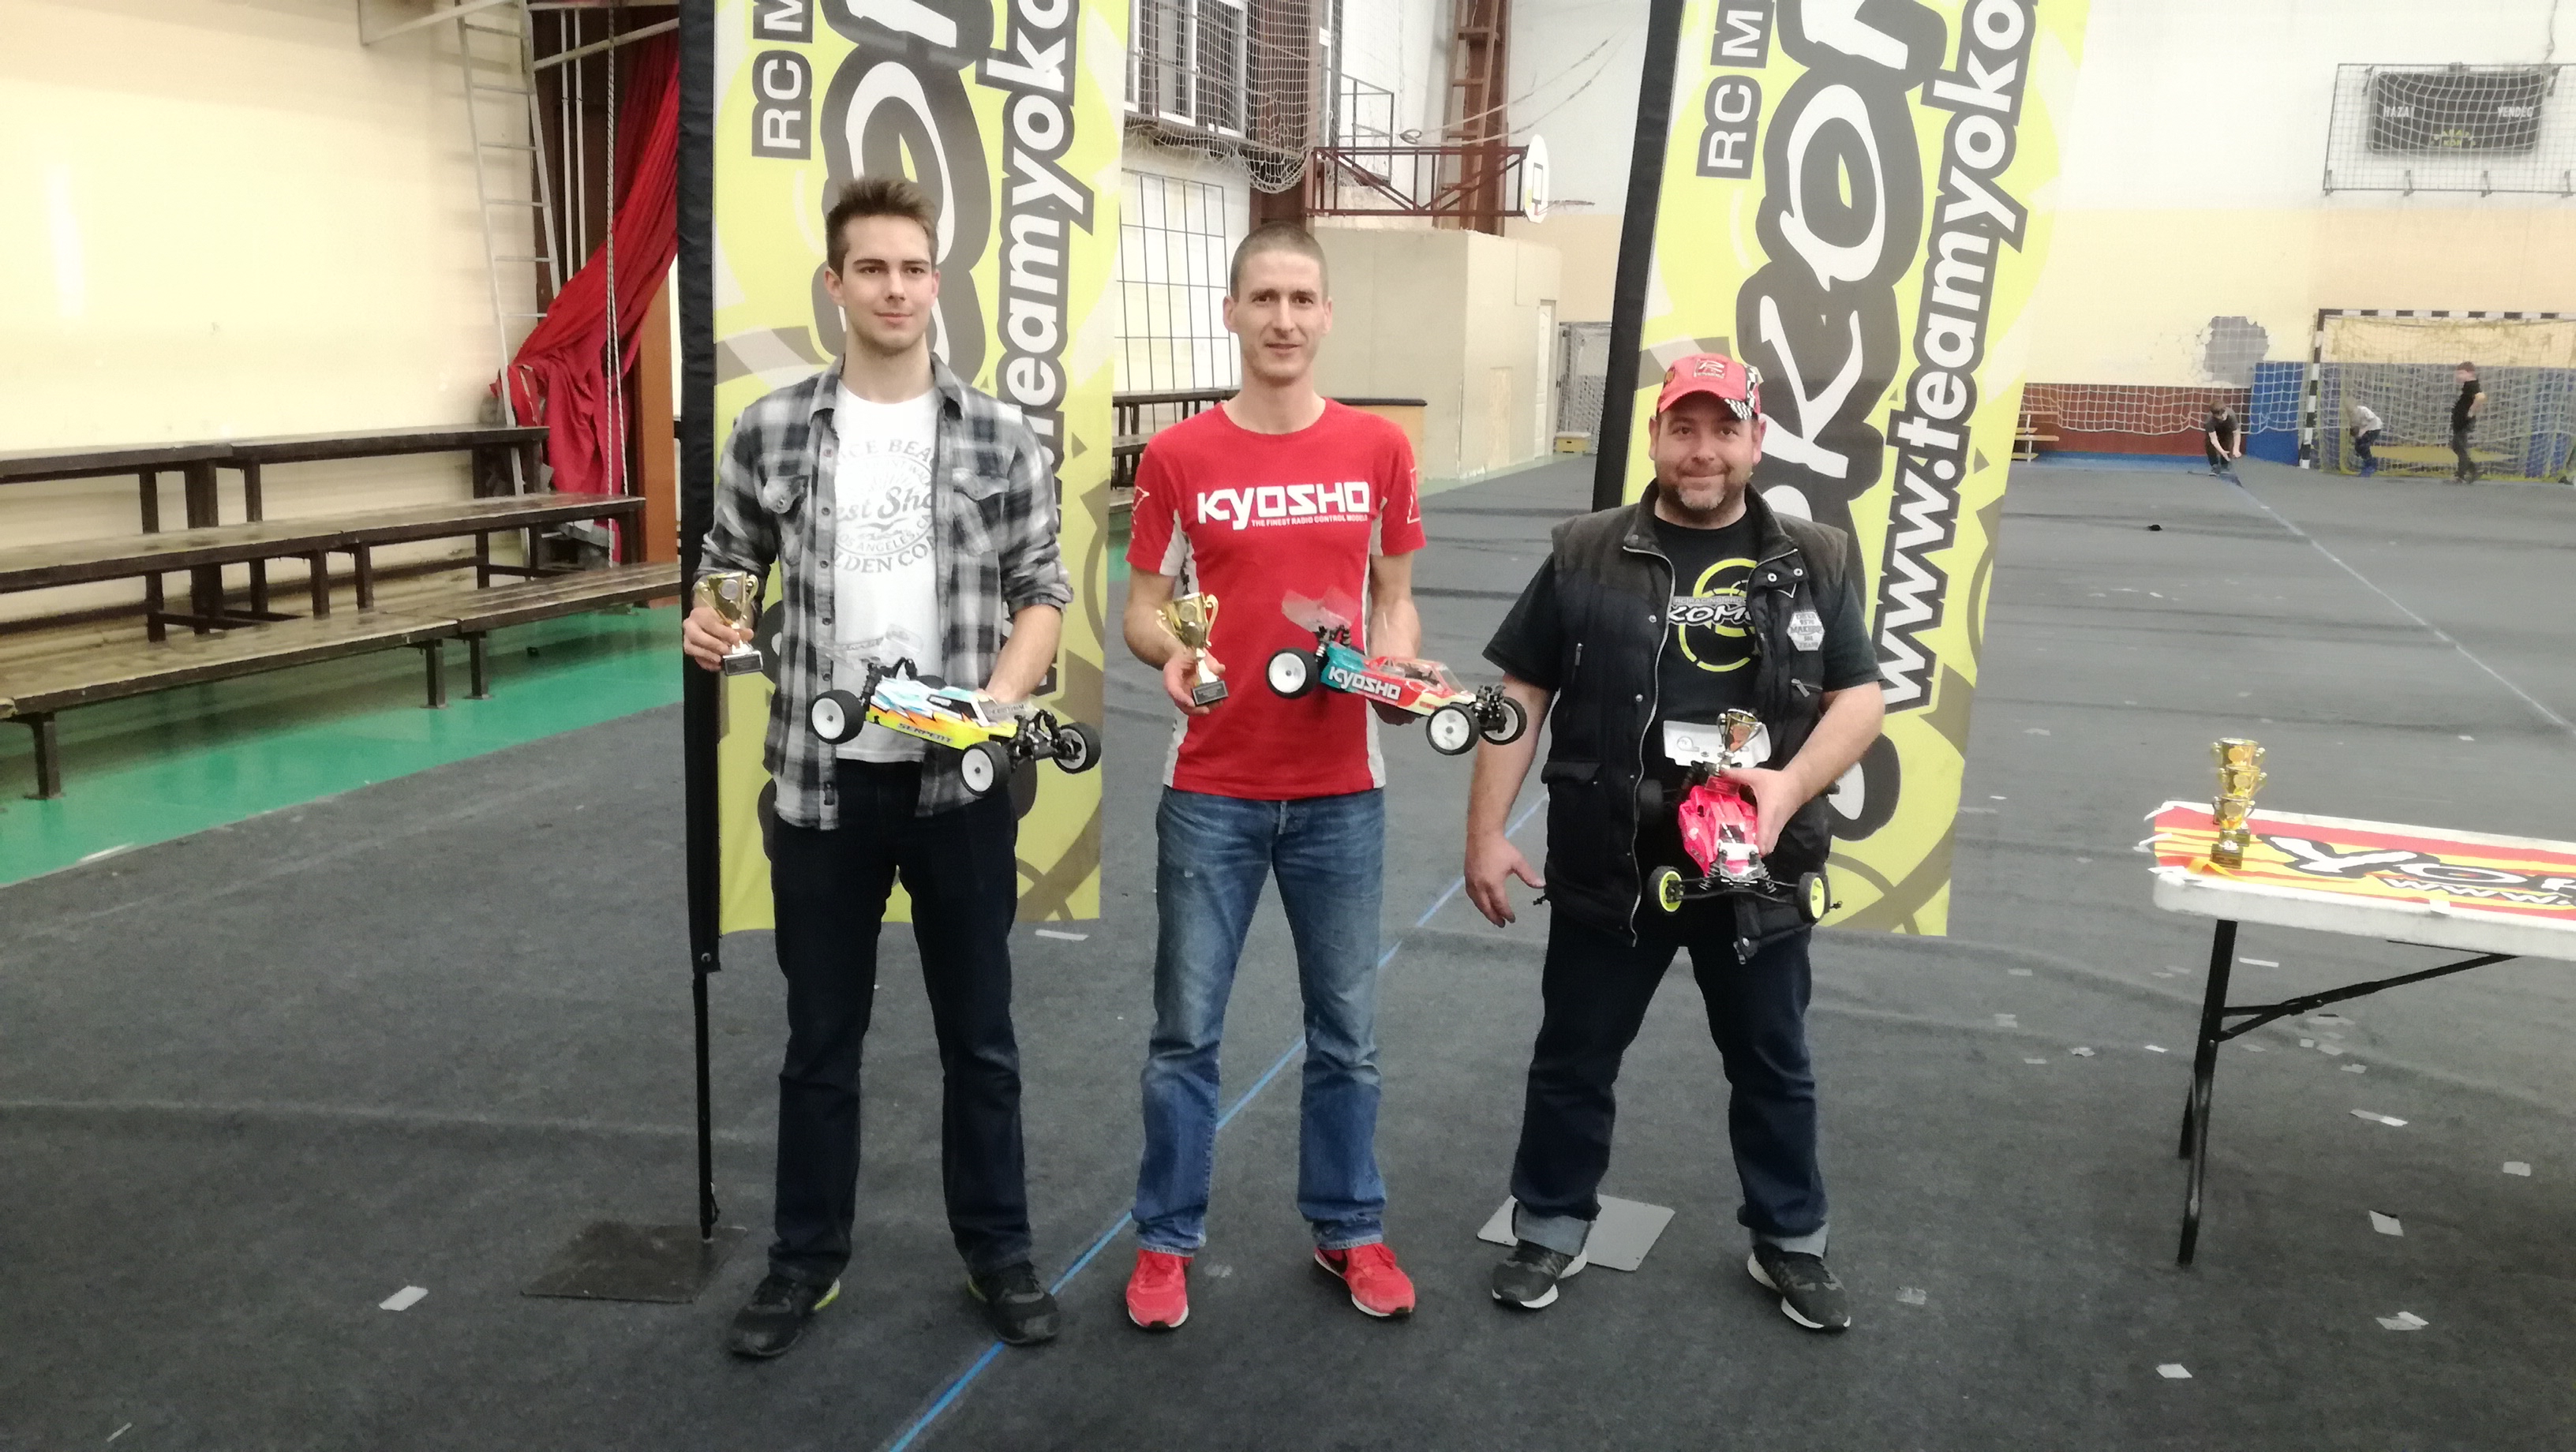 Hungarian National Champion, Daniel Schweizer wins again with his Kyosho Team Orion powered Lazer!